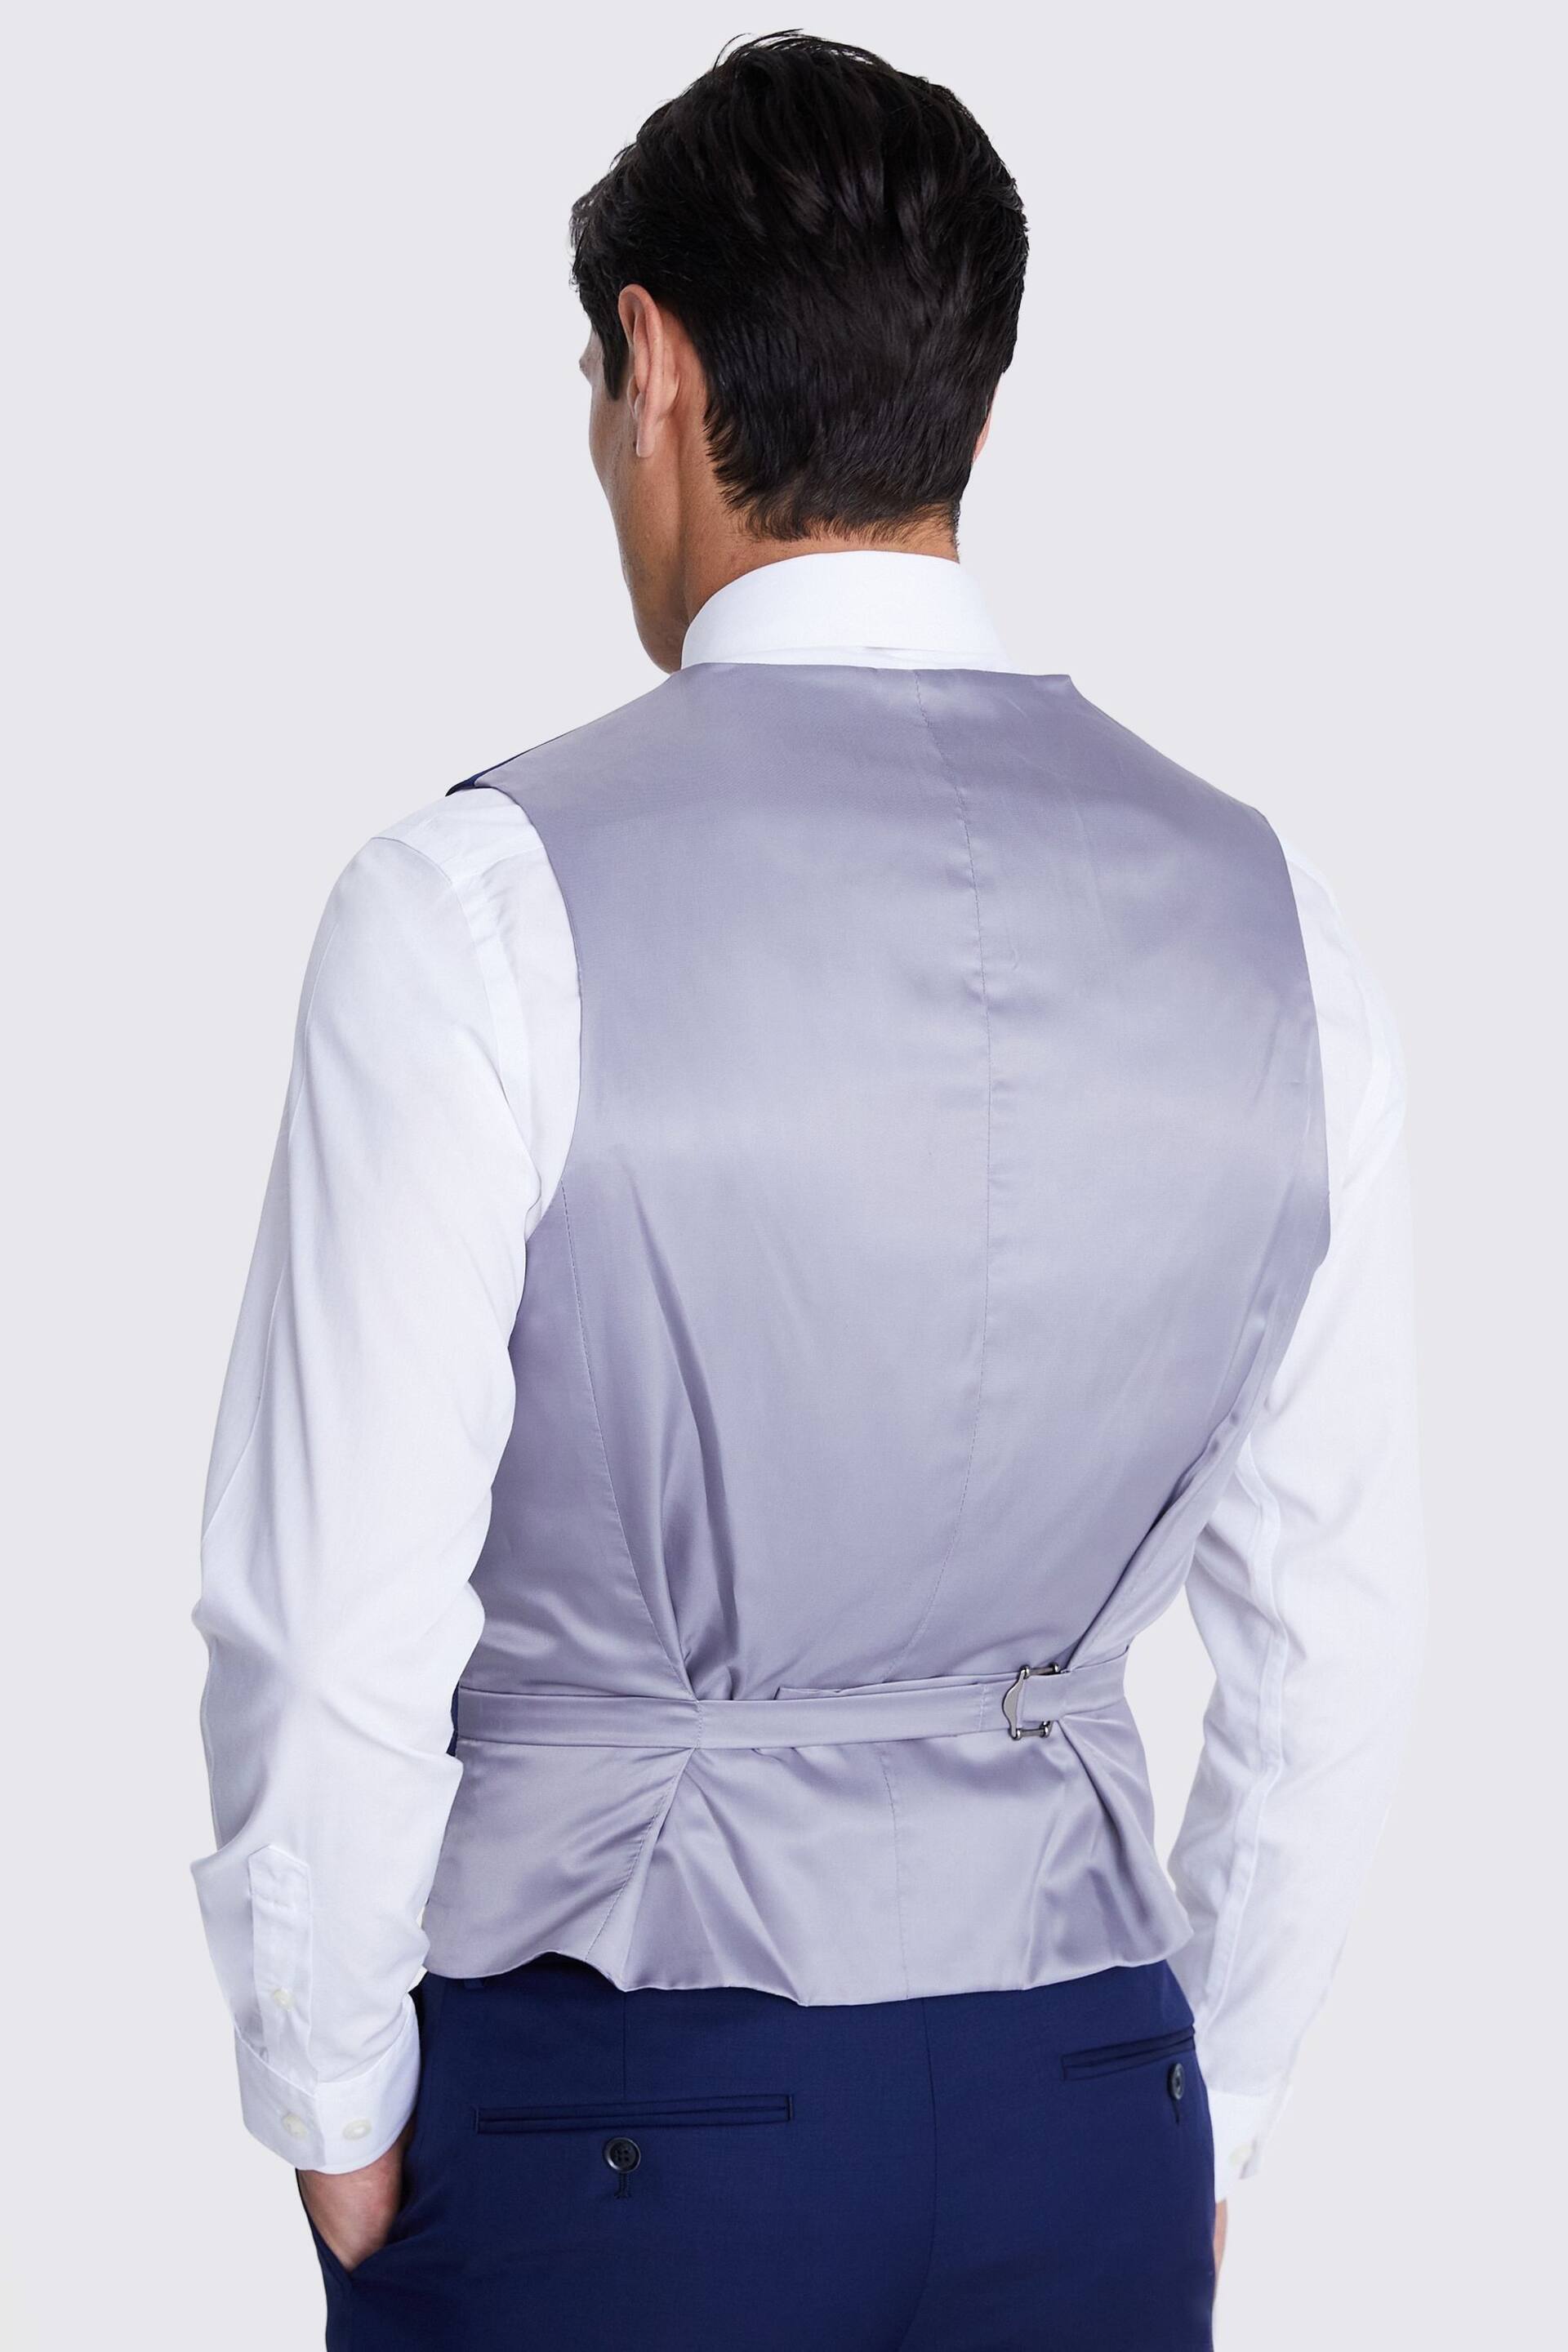 MOSS Tailored Fit Navy Twill Suit Waistcoat - Image 2 of 3